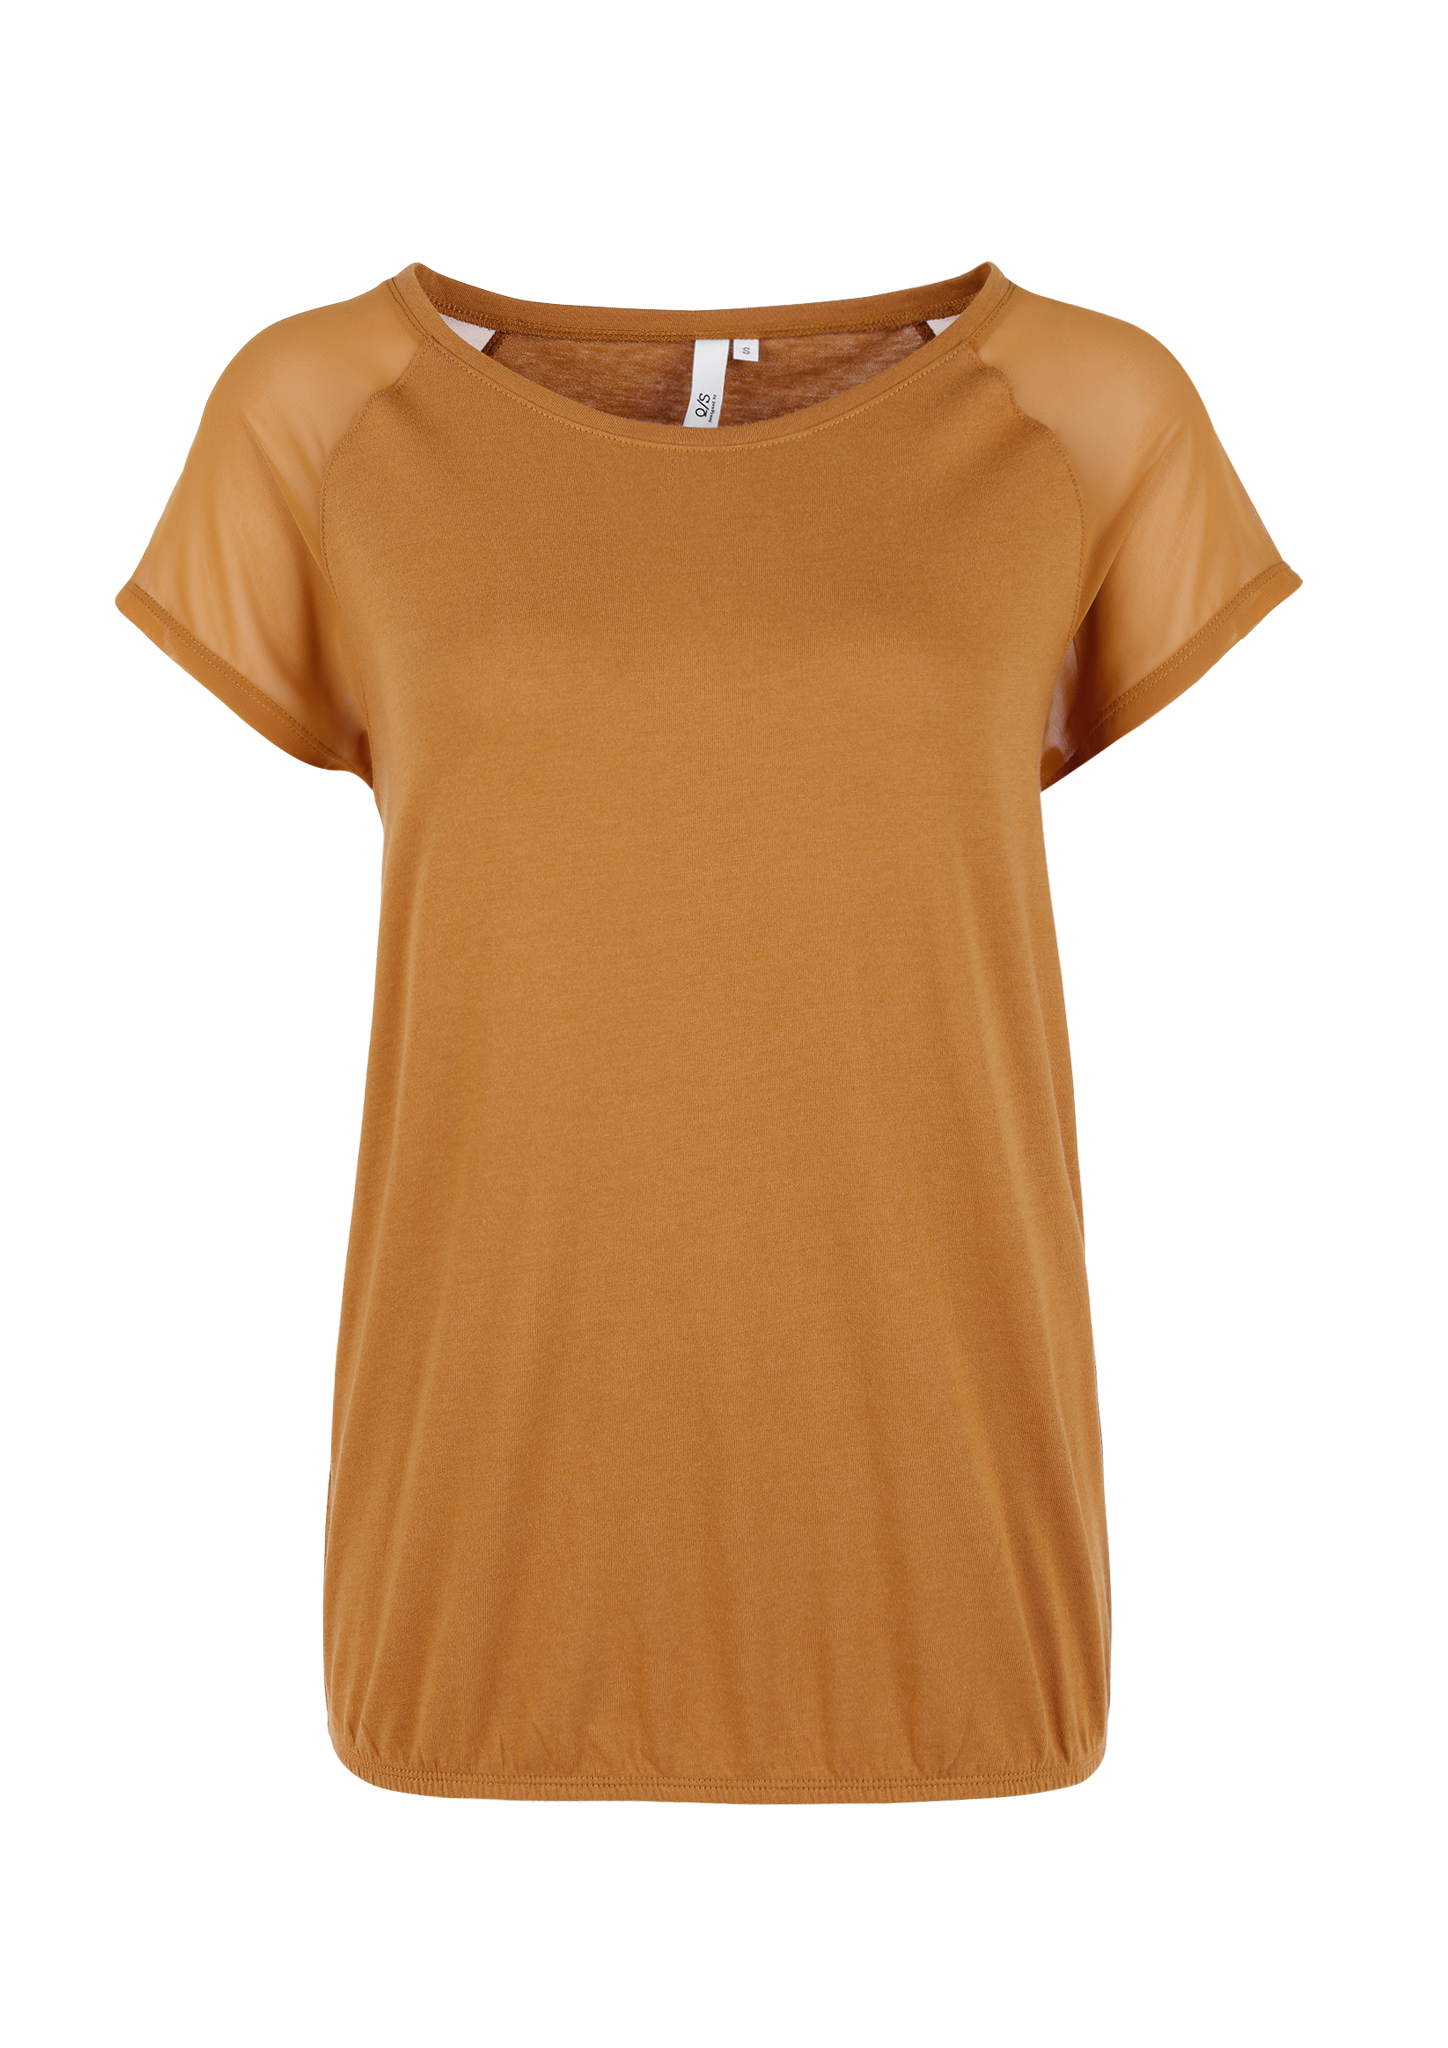 Buy O-shaped top with blouse details | s.Oliver shop